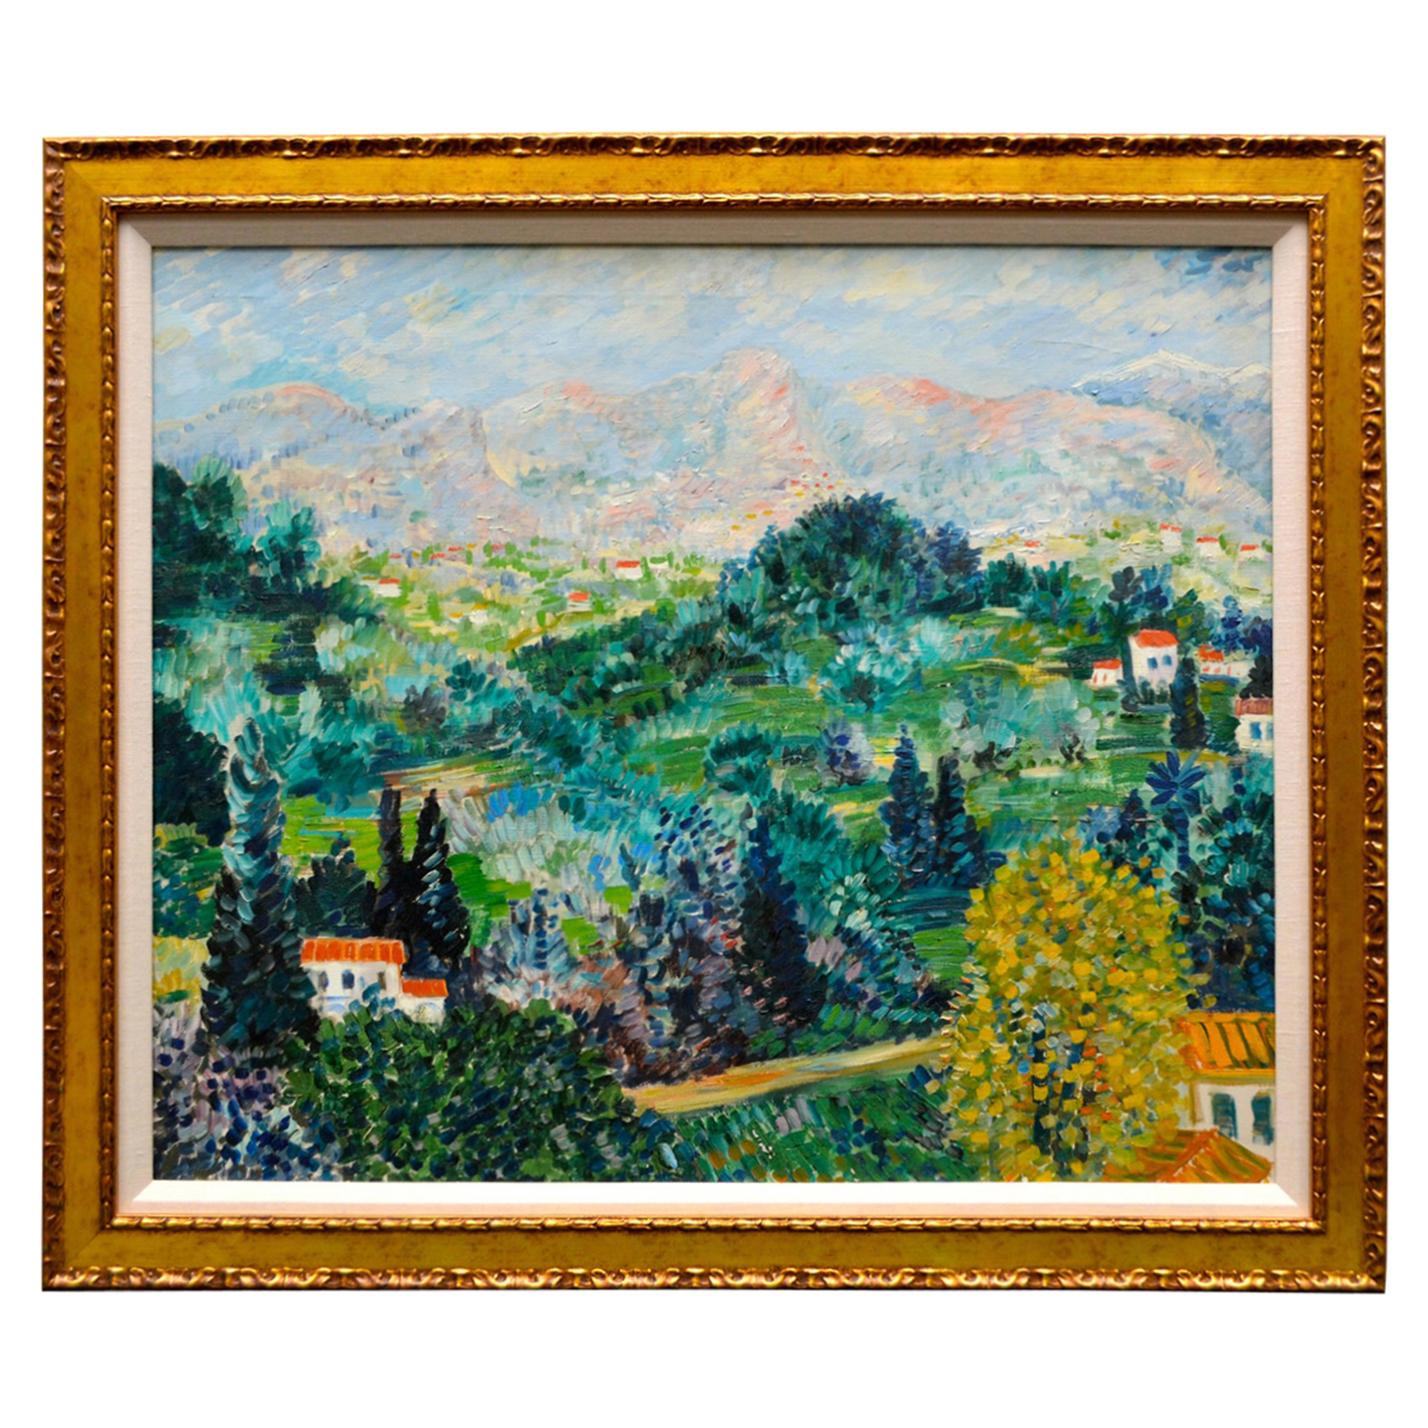 Oil Painting Depicting a Landscape in the South of France by Johannes Schiefer